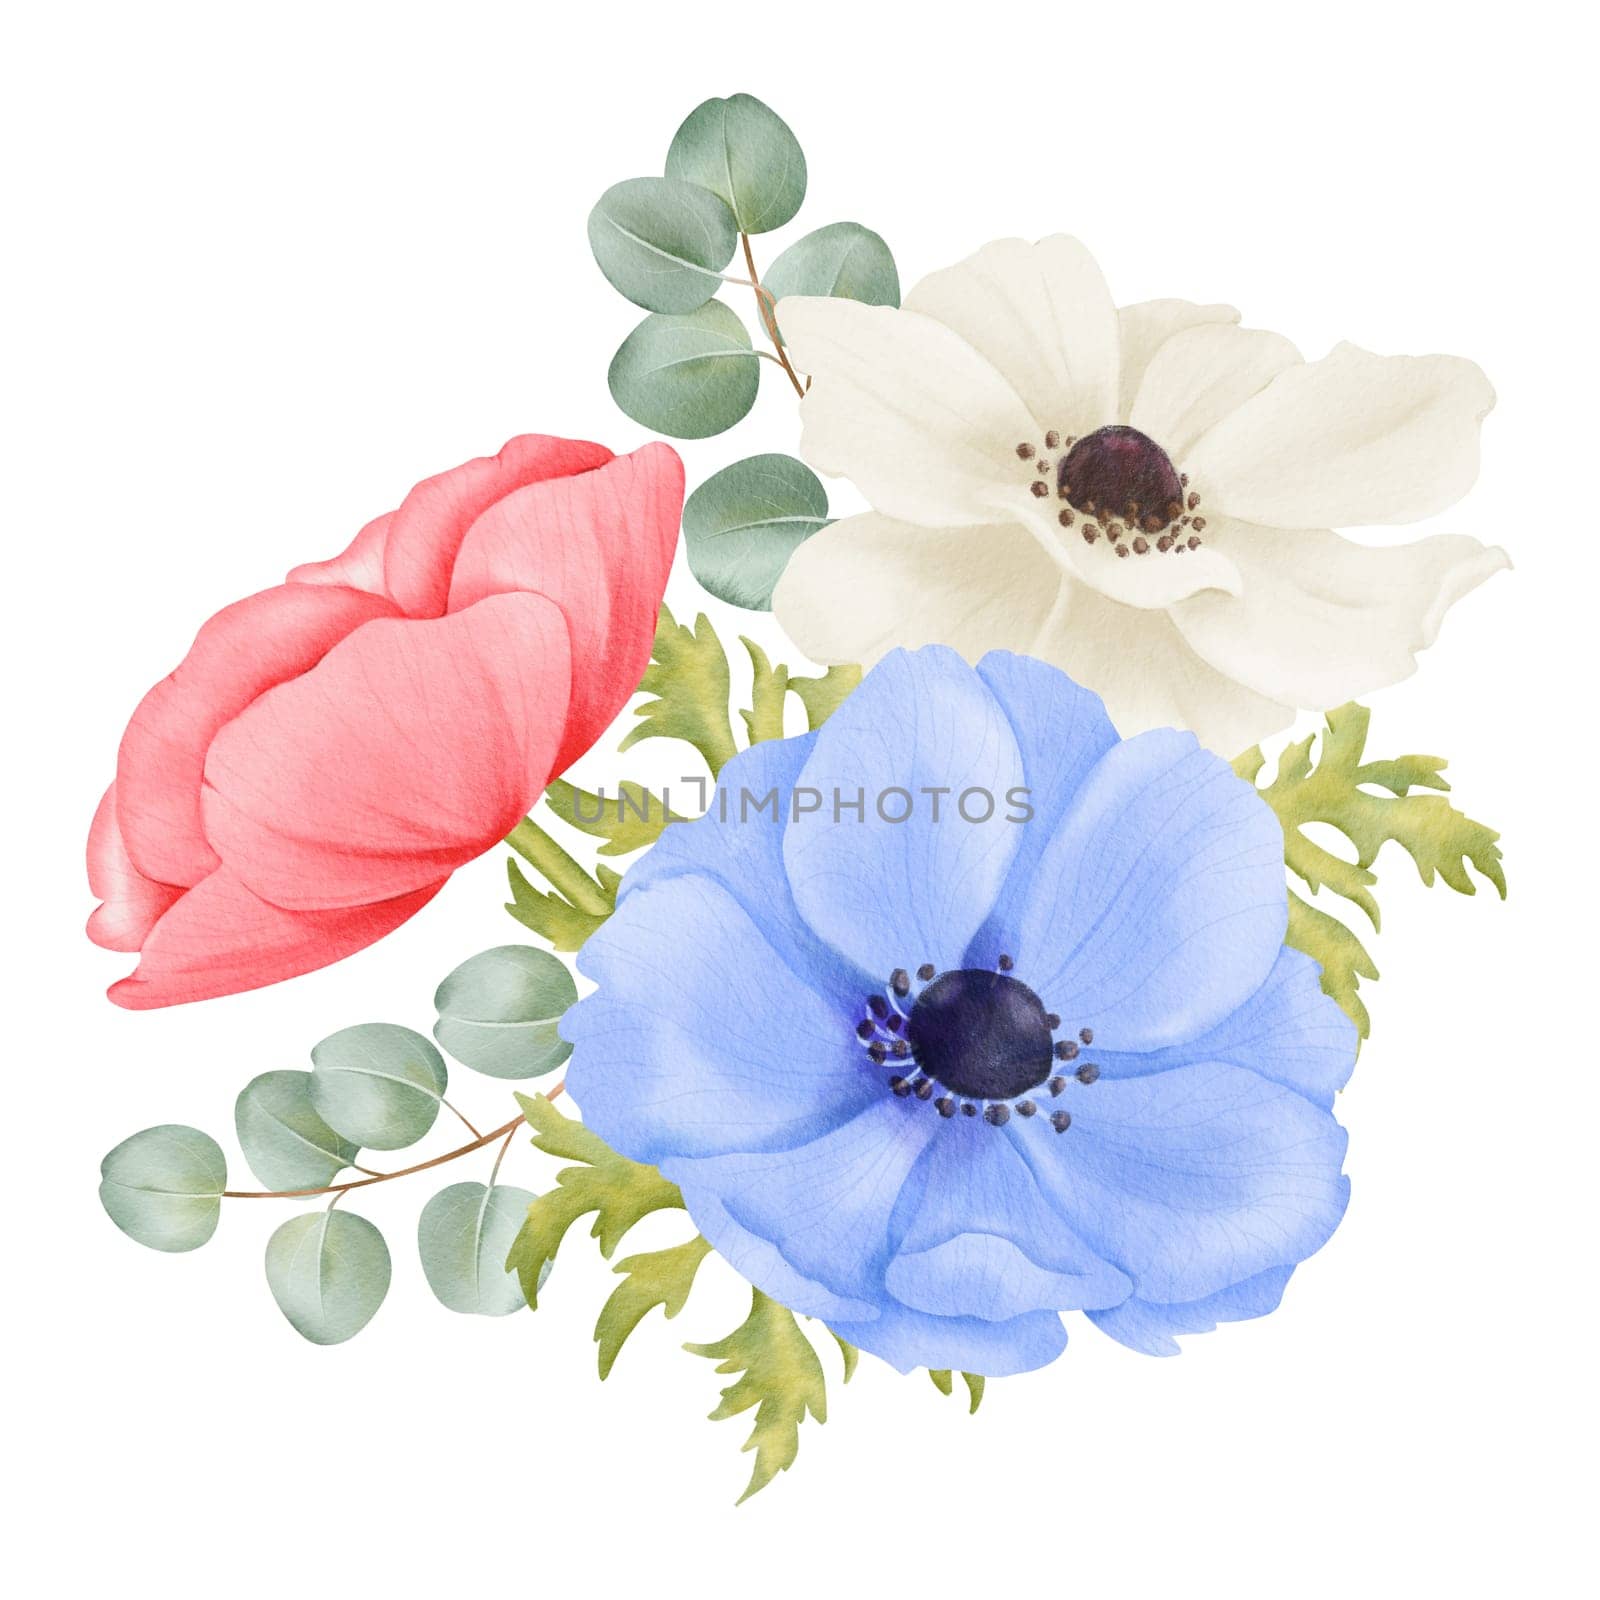 A watercolor composition pink, white and blue anemone flowers. fresh greenery and eucalyptus leaves. for wedding stationery, event invitations, botanical prints, art projects and interior decor.